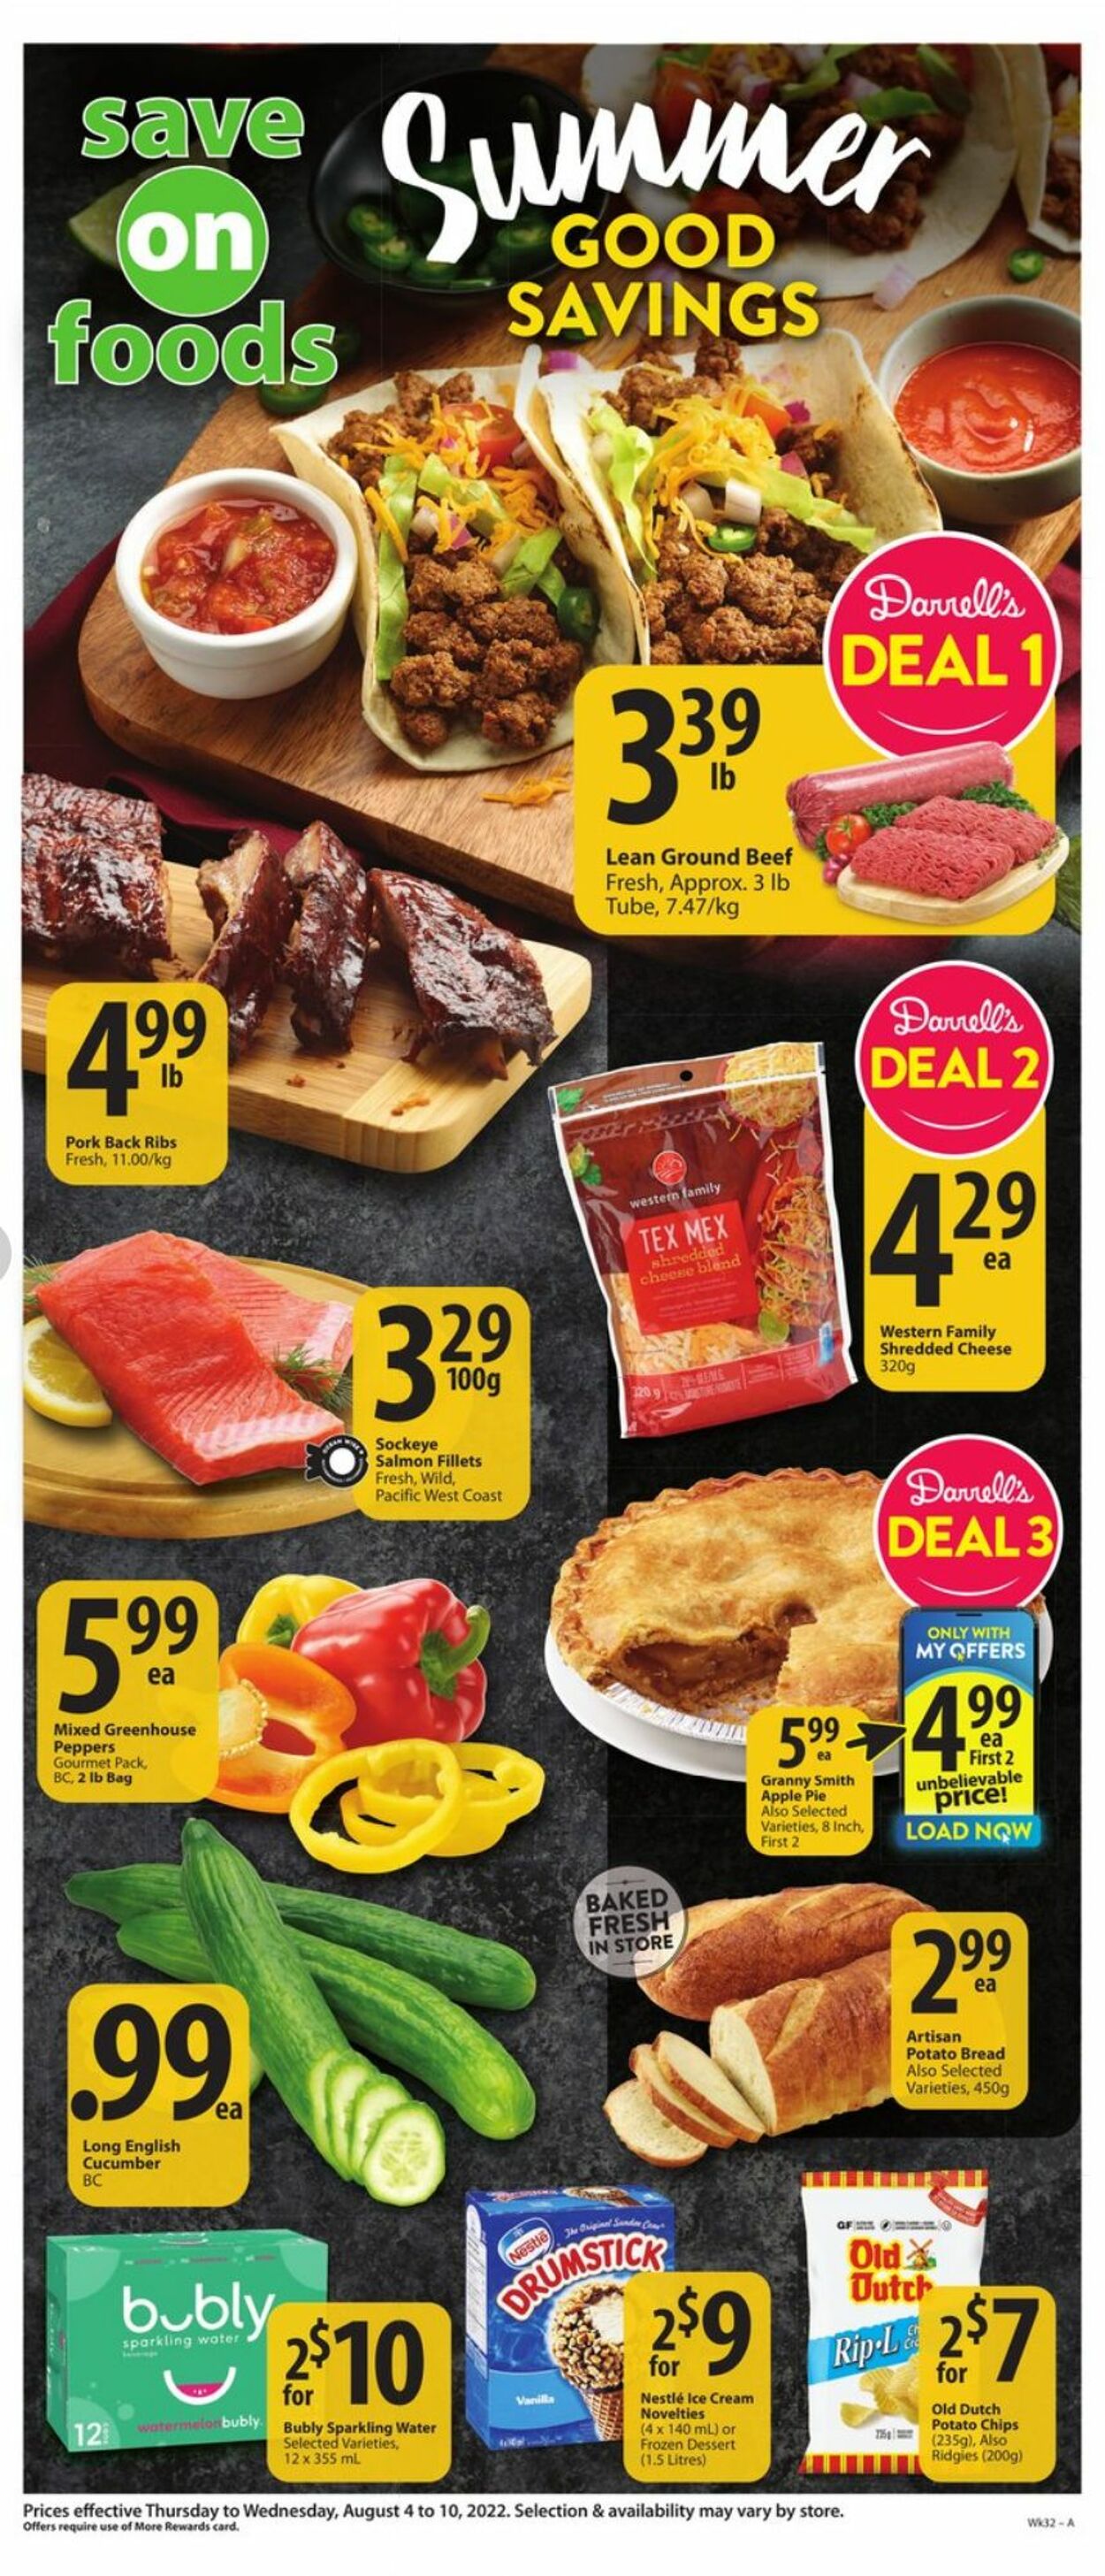 Flyer Save-On-Foods 04.08.2022 - 10.08.2022